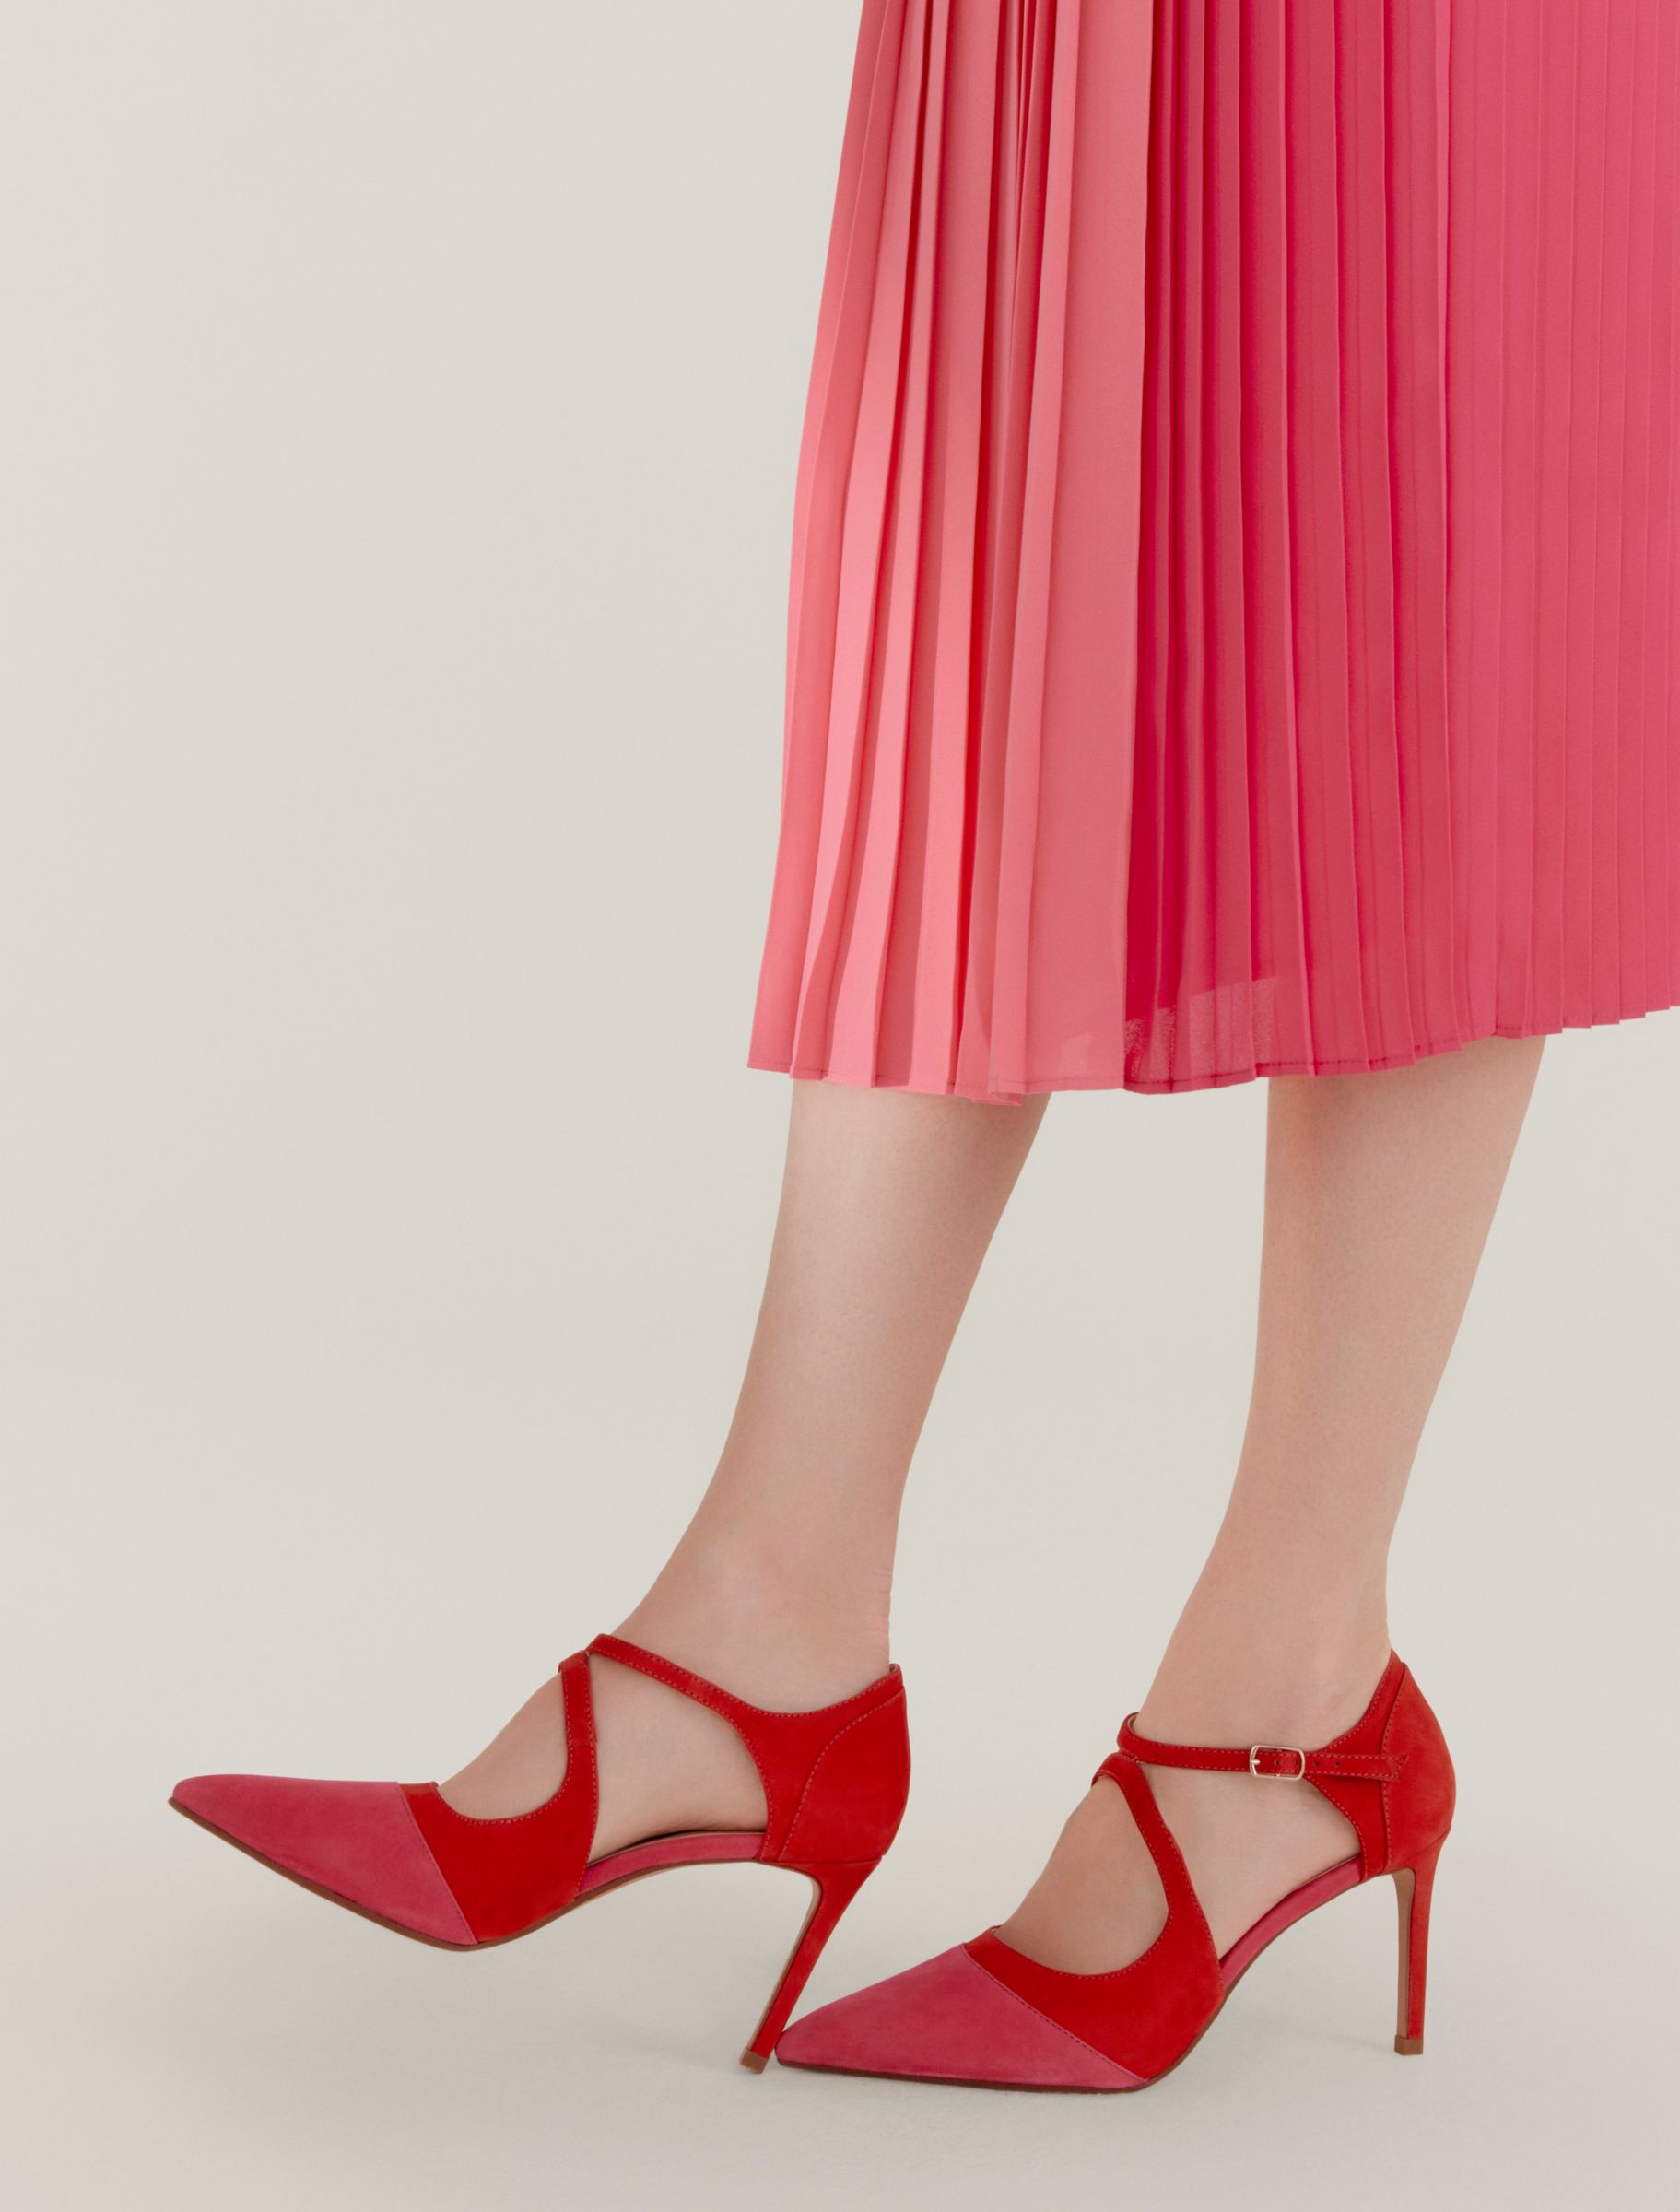 Pink and red point toe heels